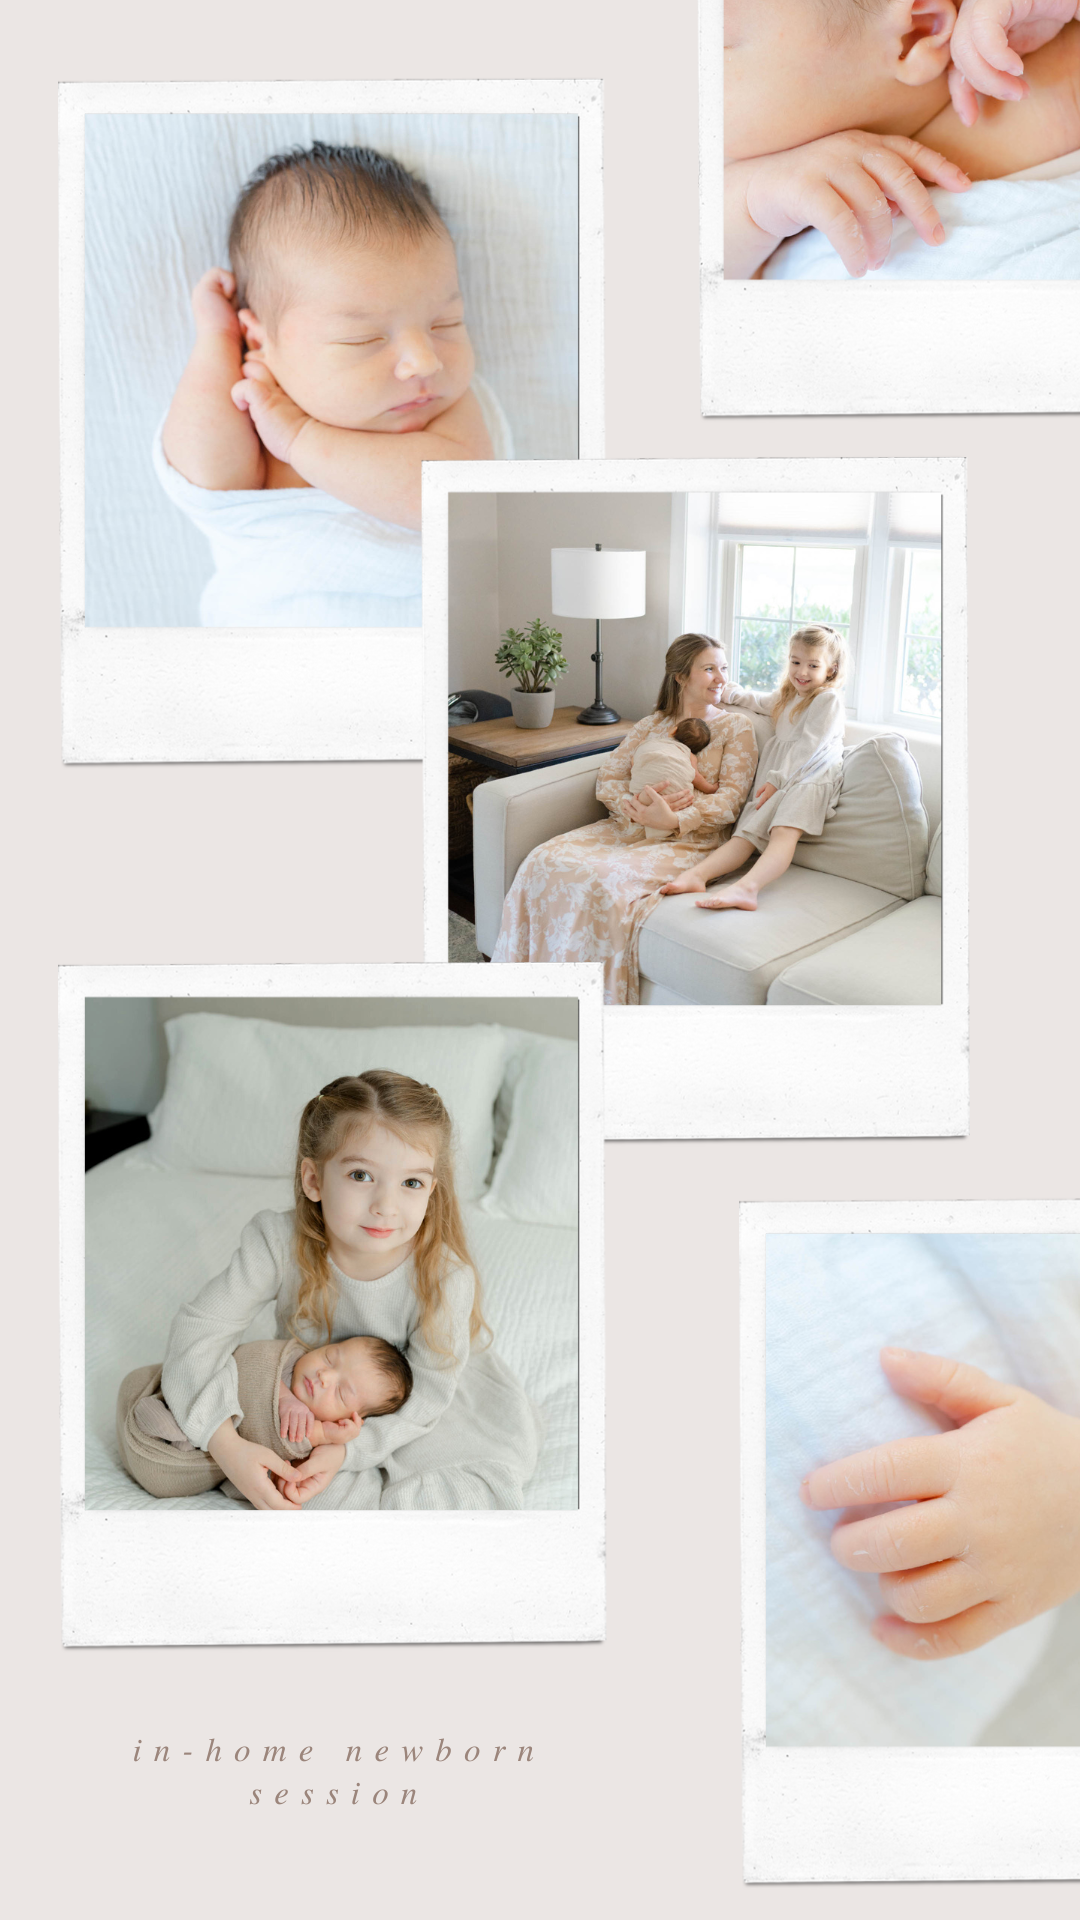 In-home Newborn Session Story